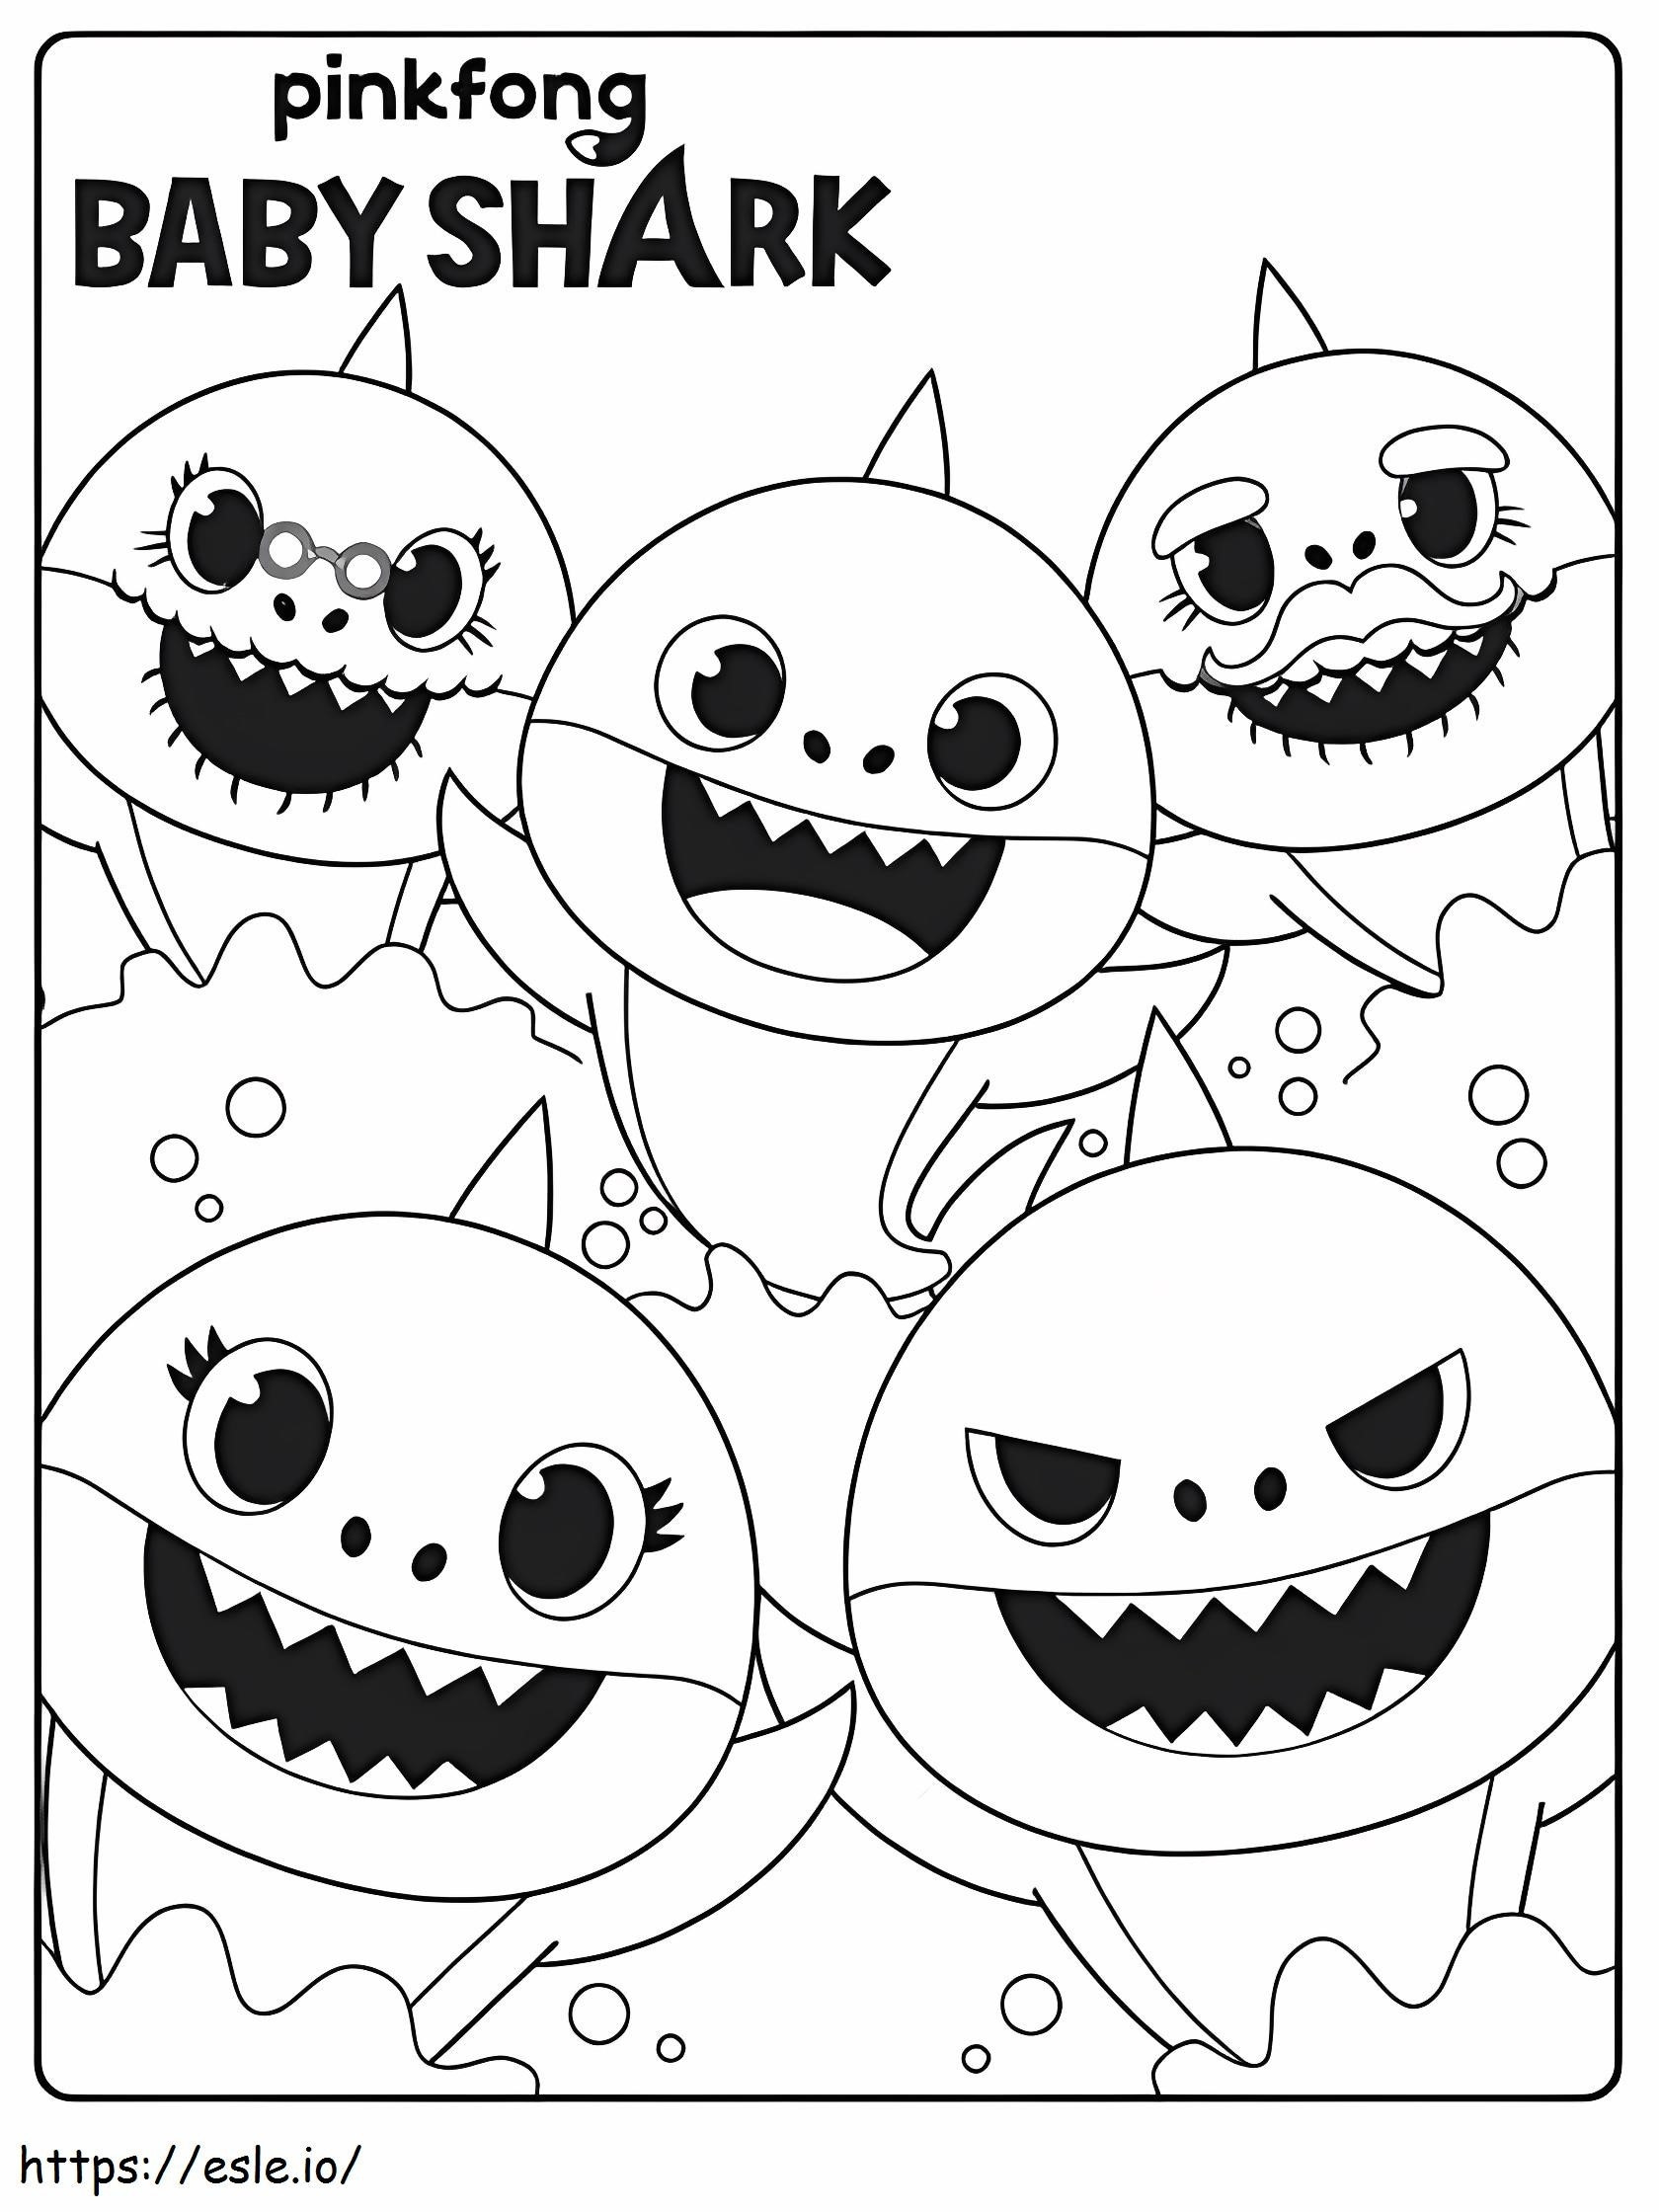 Baby Shark 2 coloring page